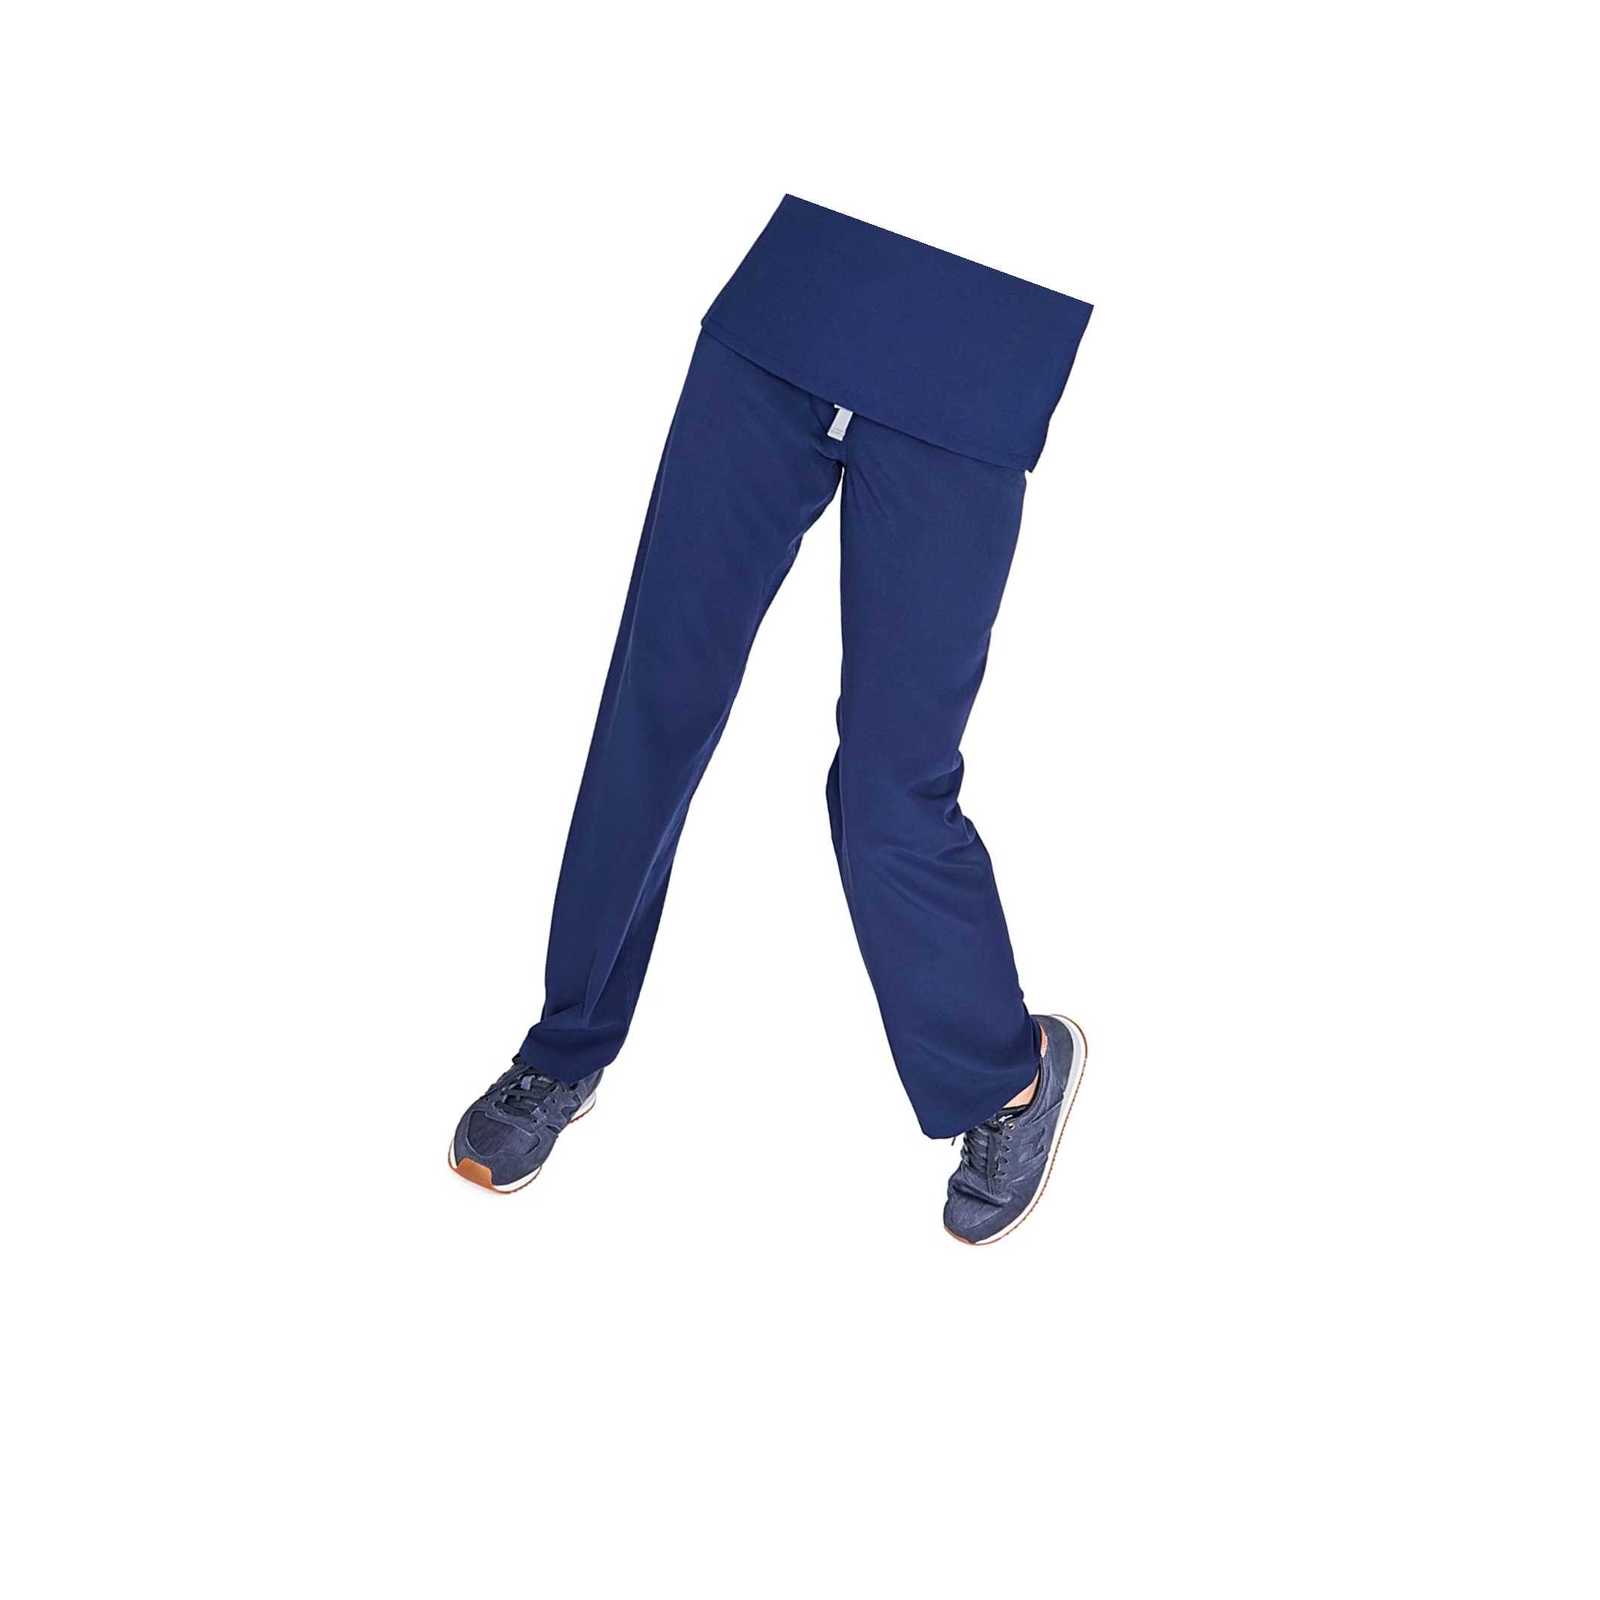 Mgrt Products - Livingston basic medical pants for women navy, x-lar